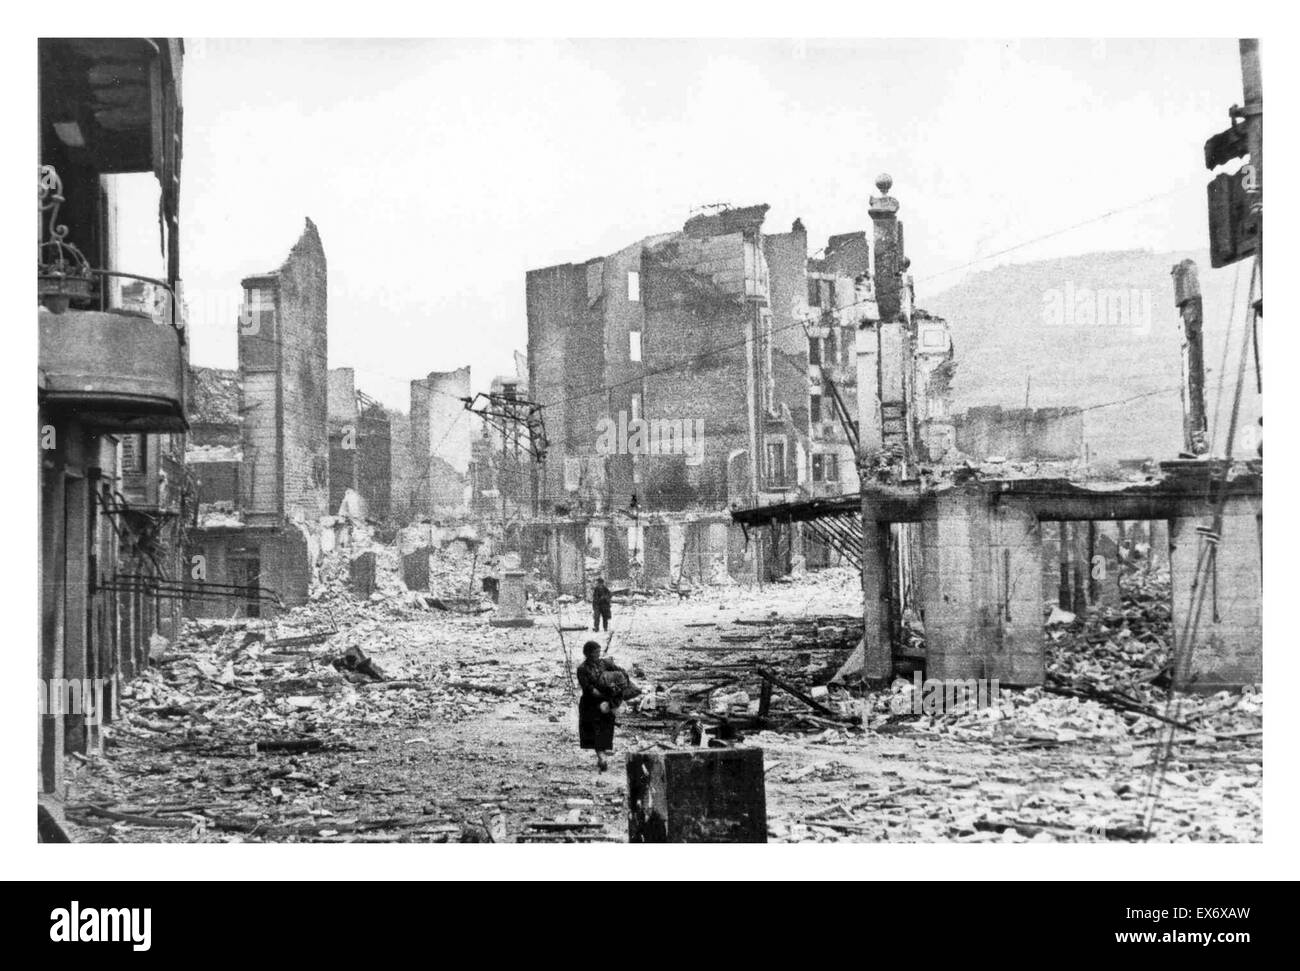 Spanish Civil War: the Spanish town of Guernica, after the bombing by German and Italian aircraft 1937. Stock Photo